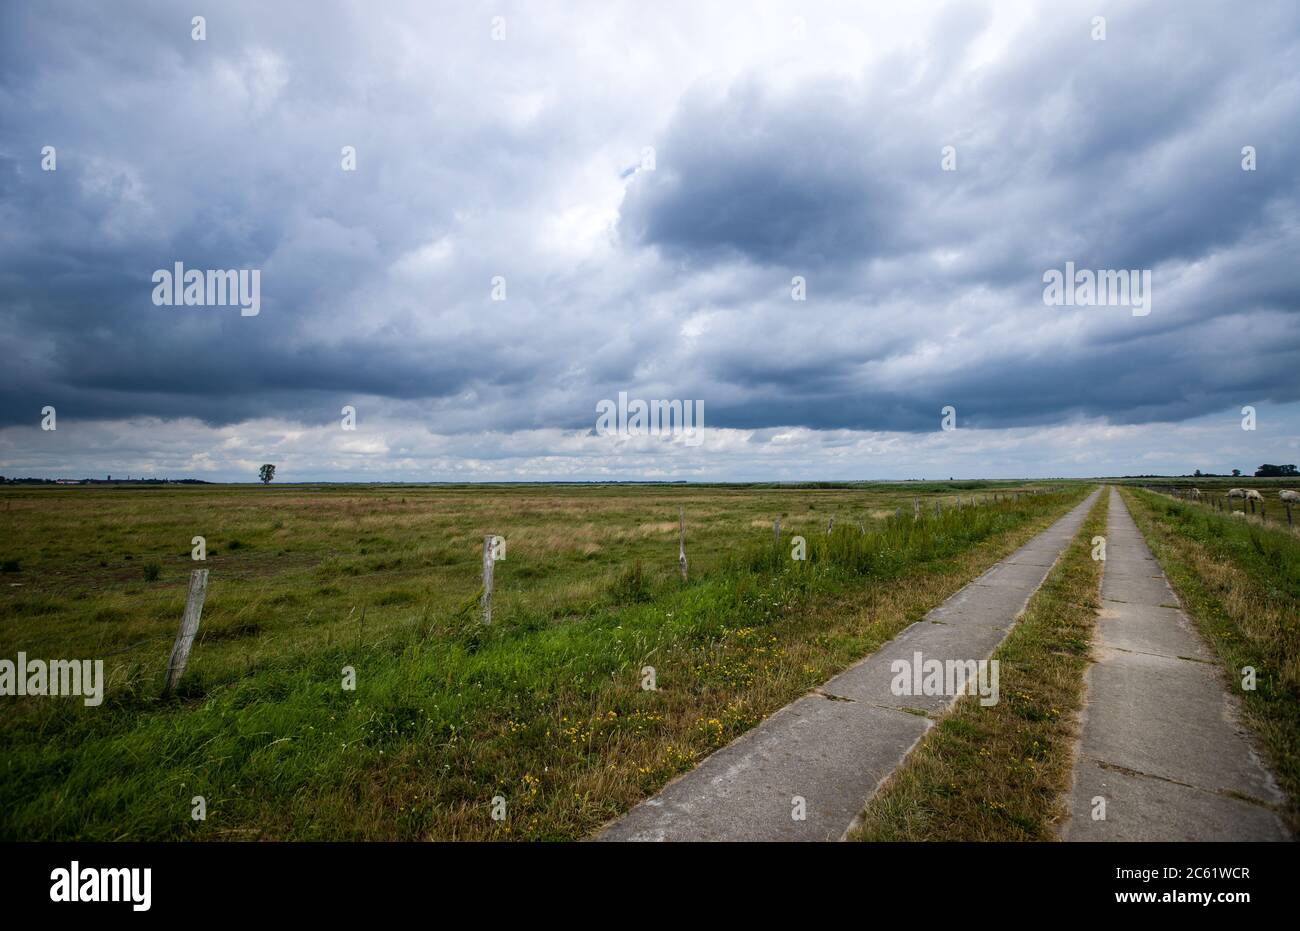 Greifswald, Germany. 02nd July, 2020. Dark rain clouds pass over the only access road to the nature reserve island Koos in the Greifswald Bodden. After the renaturation, animal and plant species that were thought to be lost have returned to the island in recent years. The Succow Foundation was established in 1999 as the first non-profit nature conservation foundation in the new German states. In 2016 it took over 365 hectares on the island and in the Karrendorf meadows on the mainland. Credit: Jens Büttner/dpa-Zentralbild/ZB/dpa/Alamy Live News Stock Photo